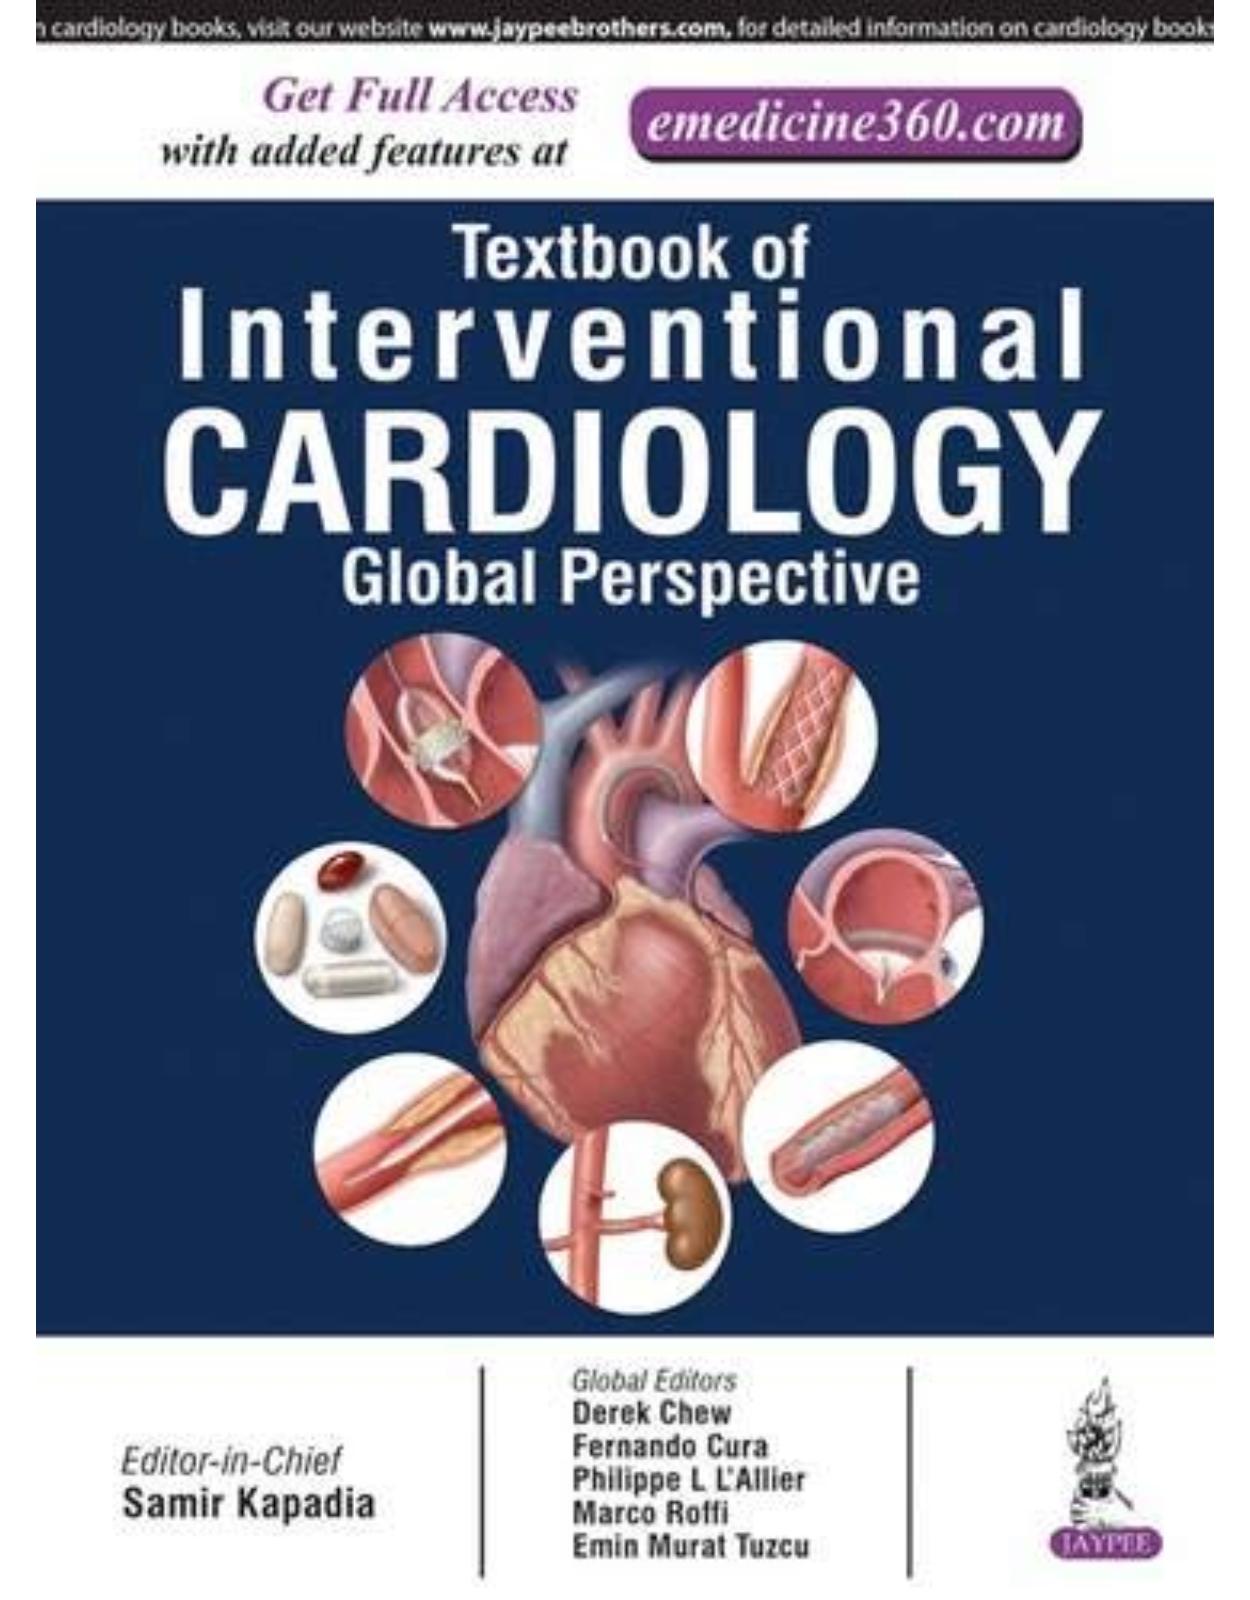 Textbook of Interventional Cardiology: Global Perspective